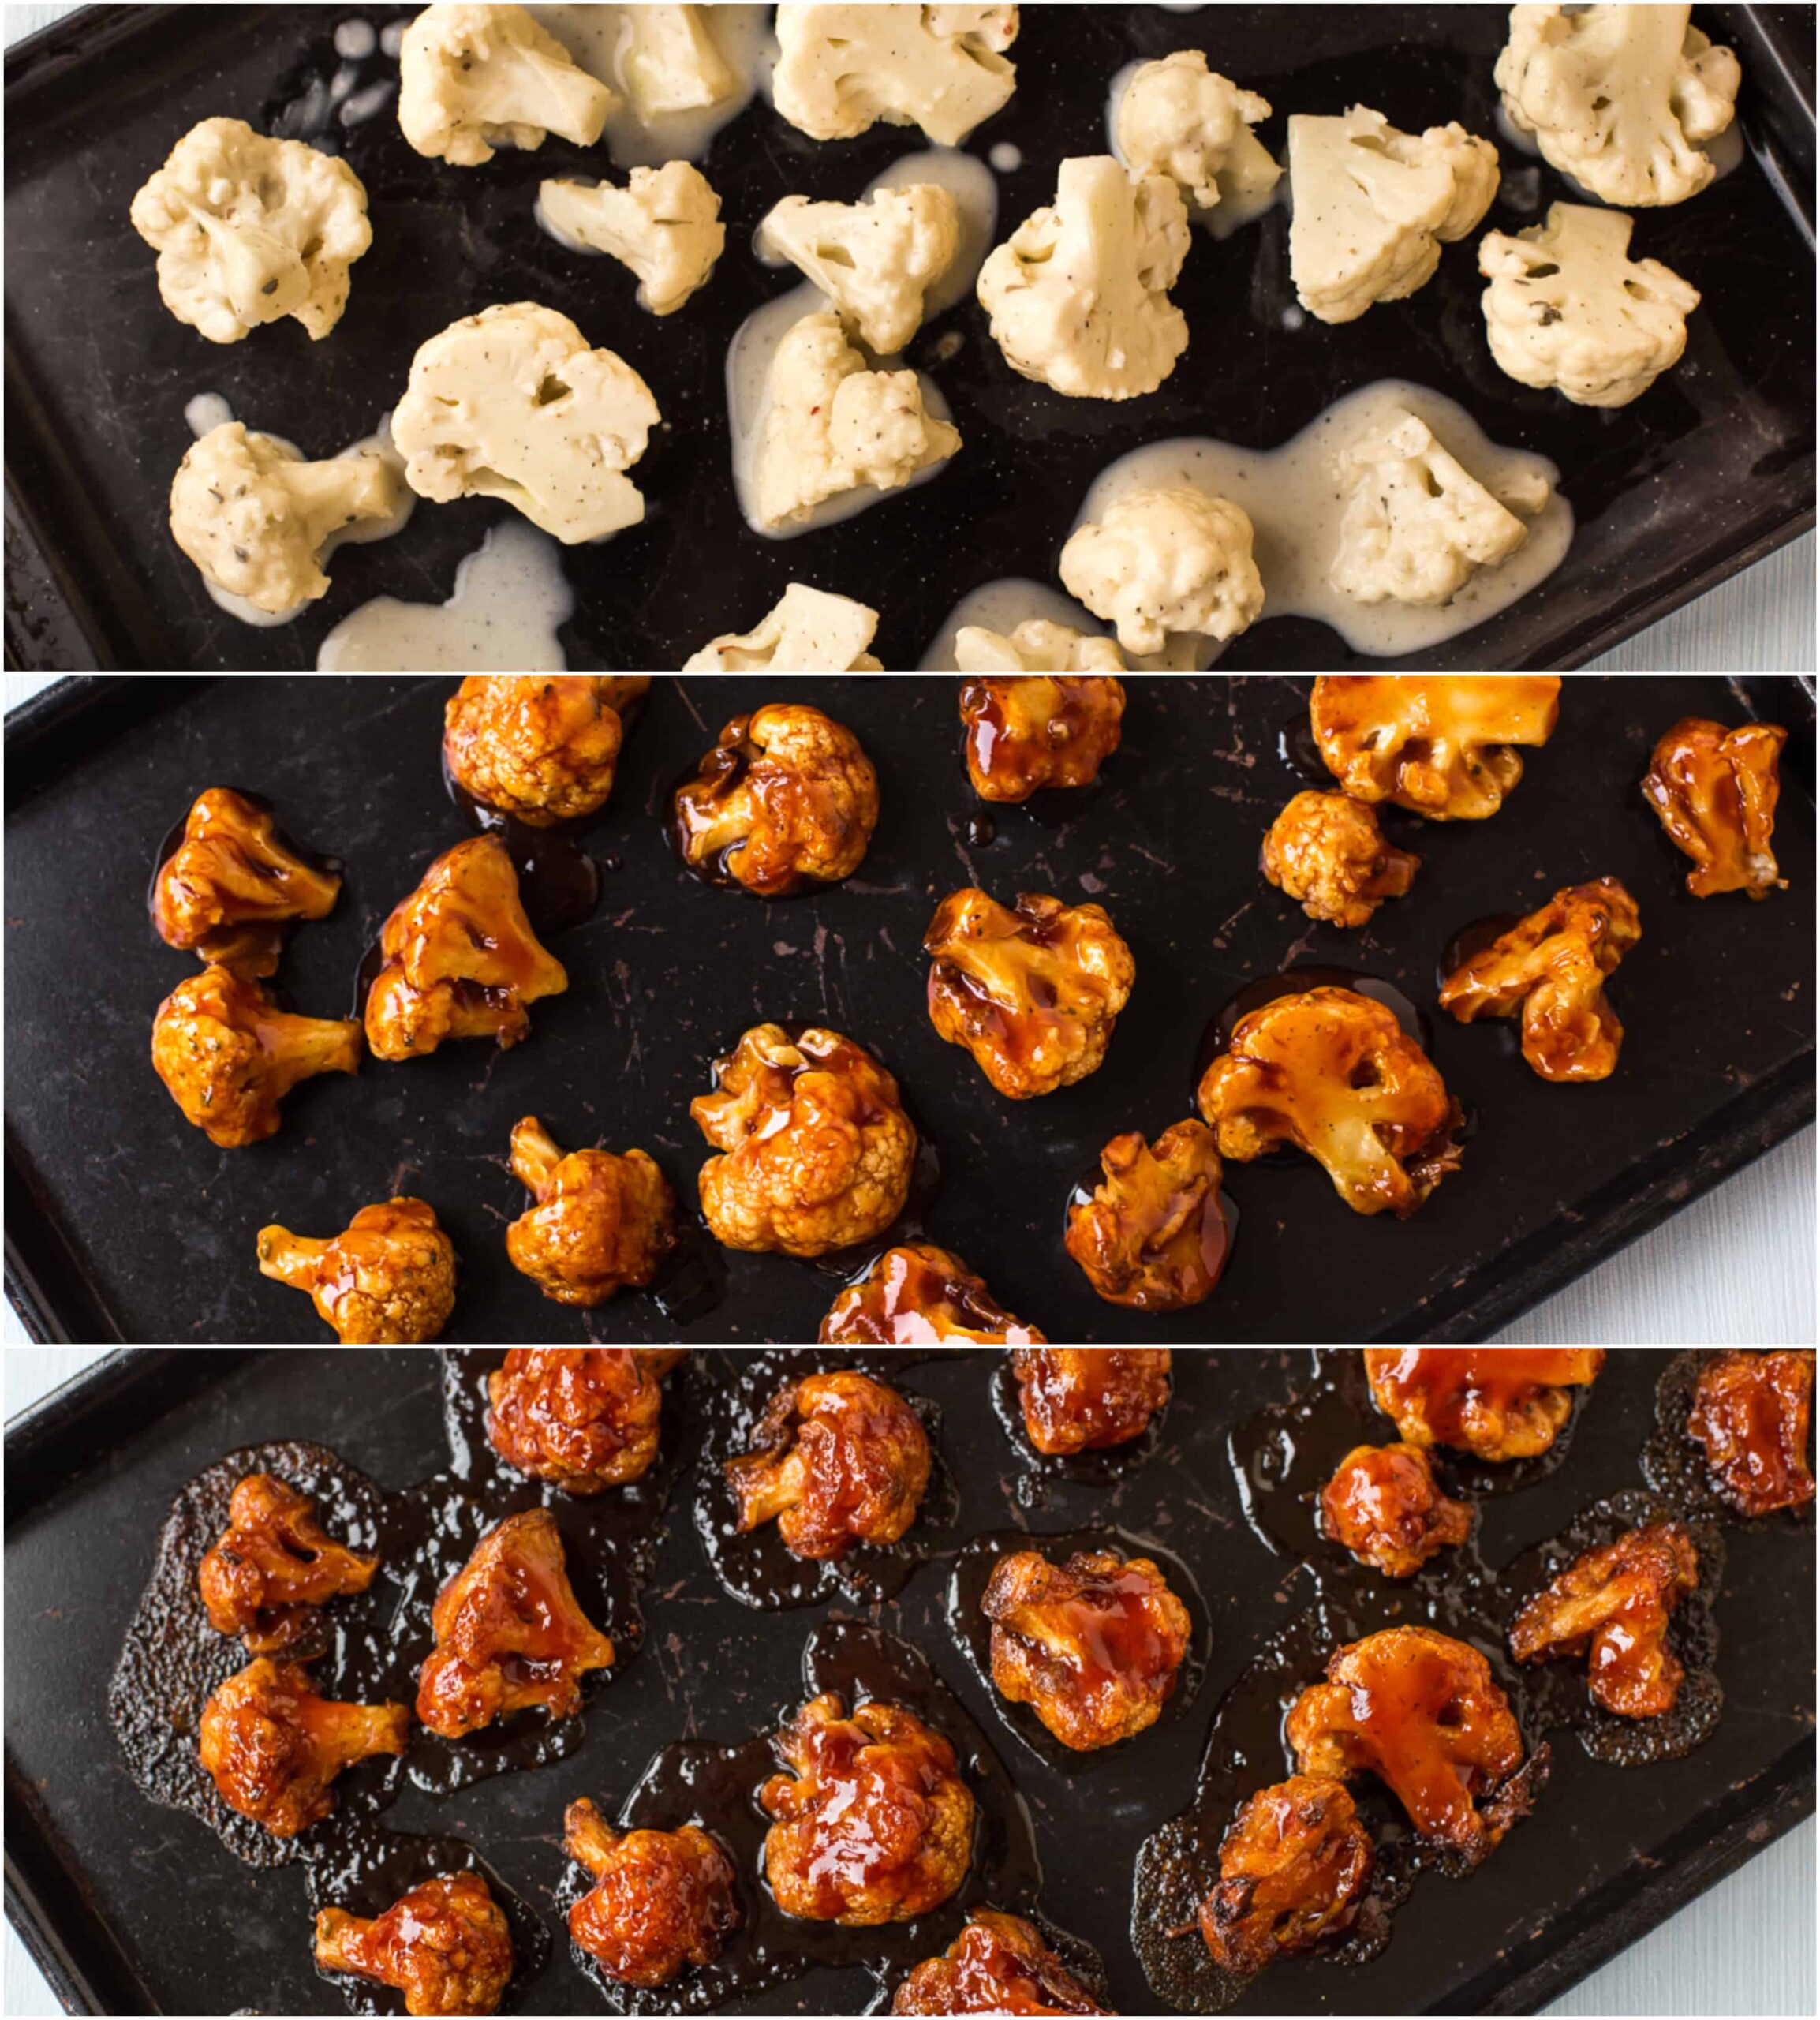 Collage showing cauliflower wings at different stages of cooking.